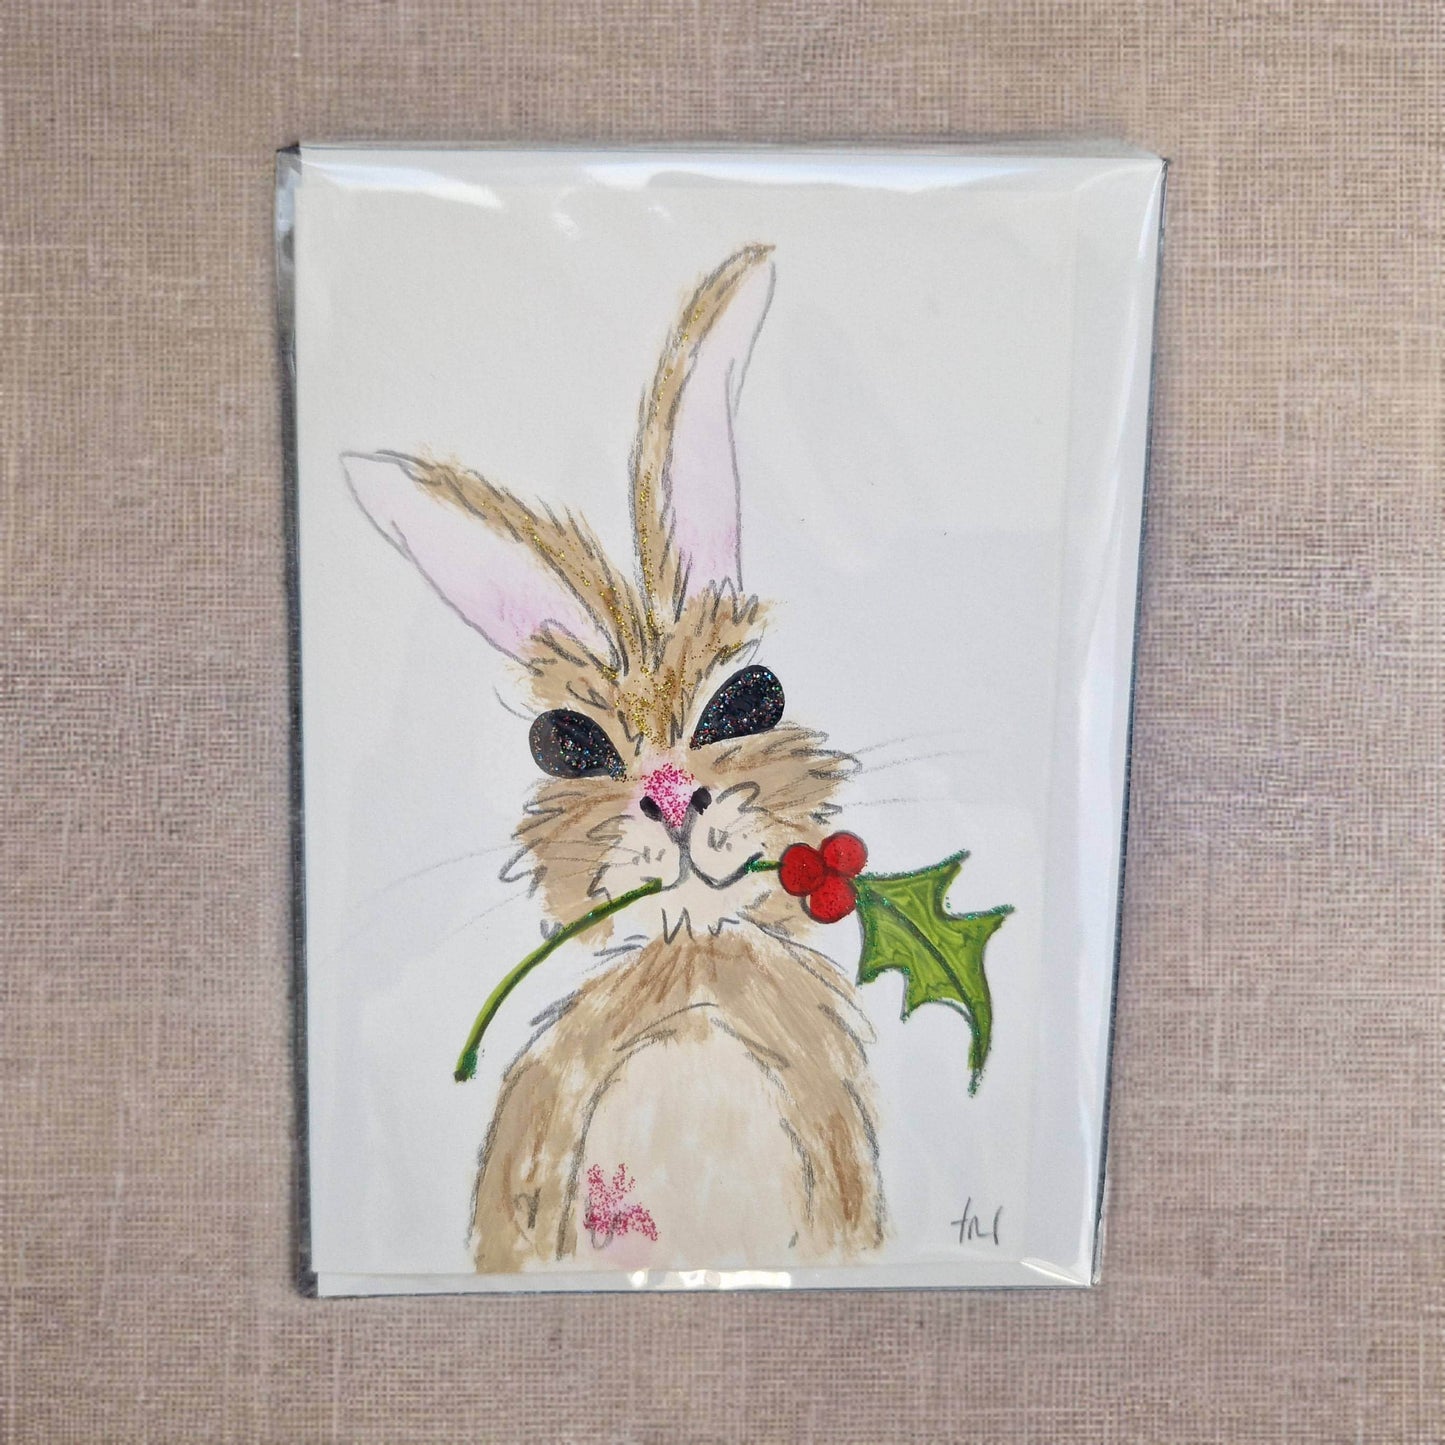 Christmas greeting cards with animal by Tracey Laughton artist